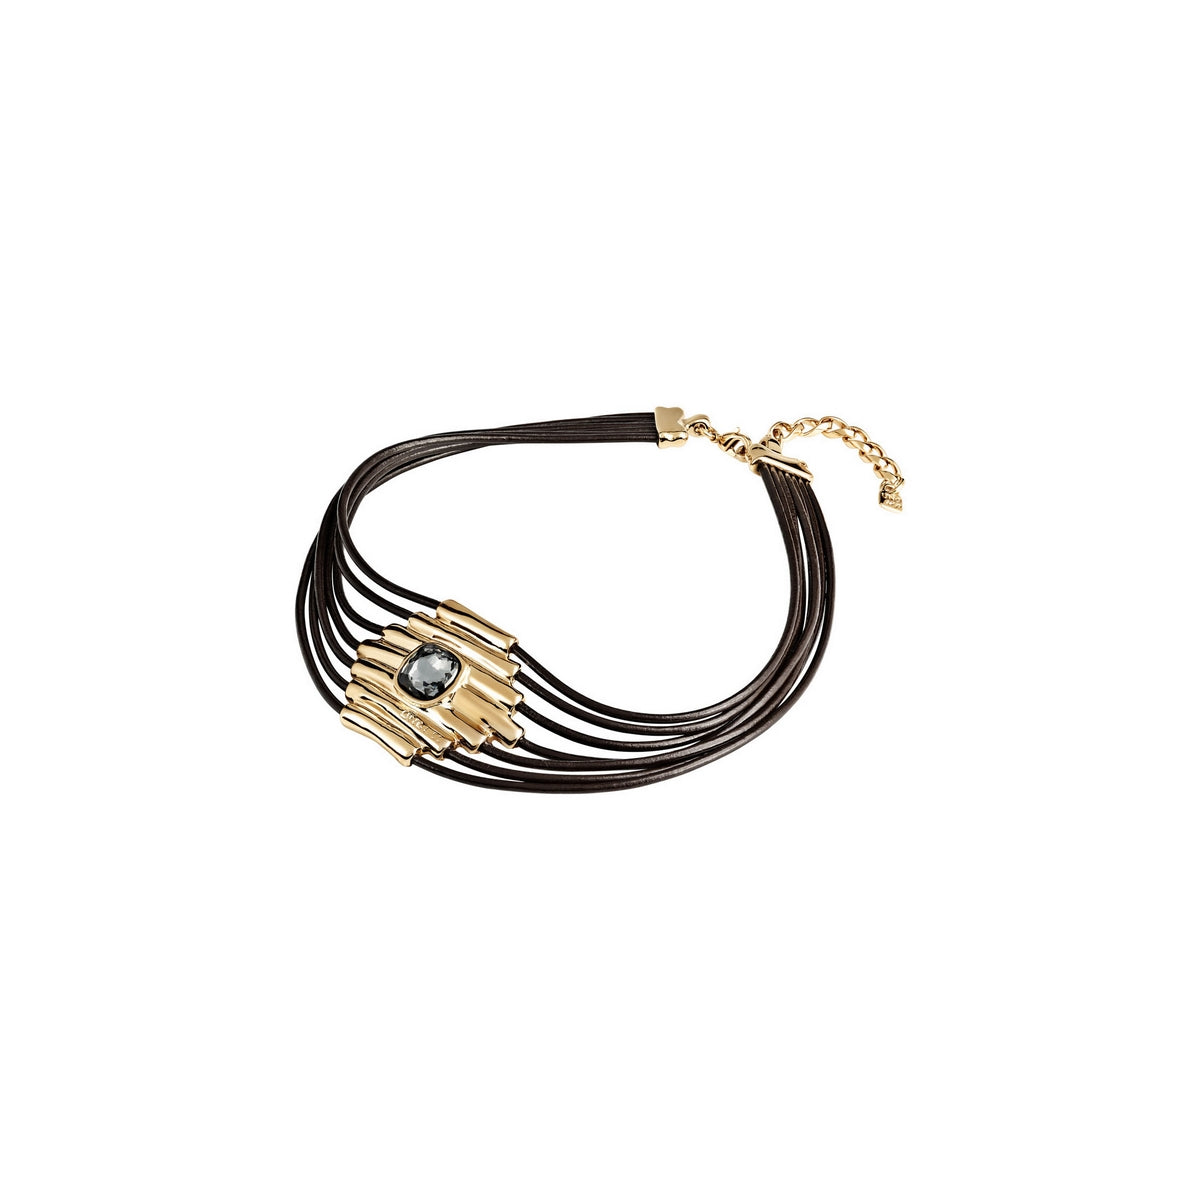 uno de 50 attached short 7- brown leather strap necklace  gold-plated metal alloy cast tubule charm and grey crystal